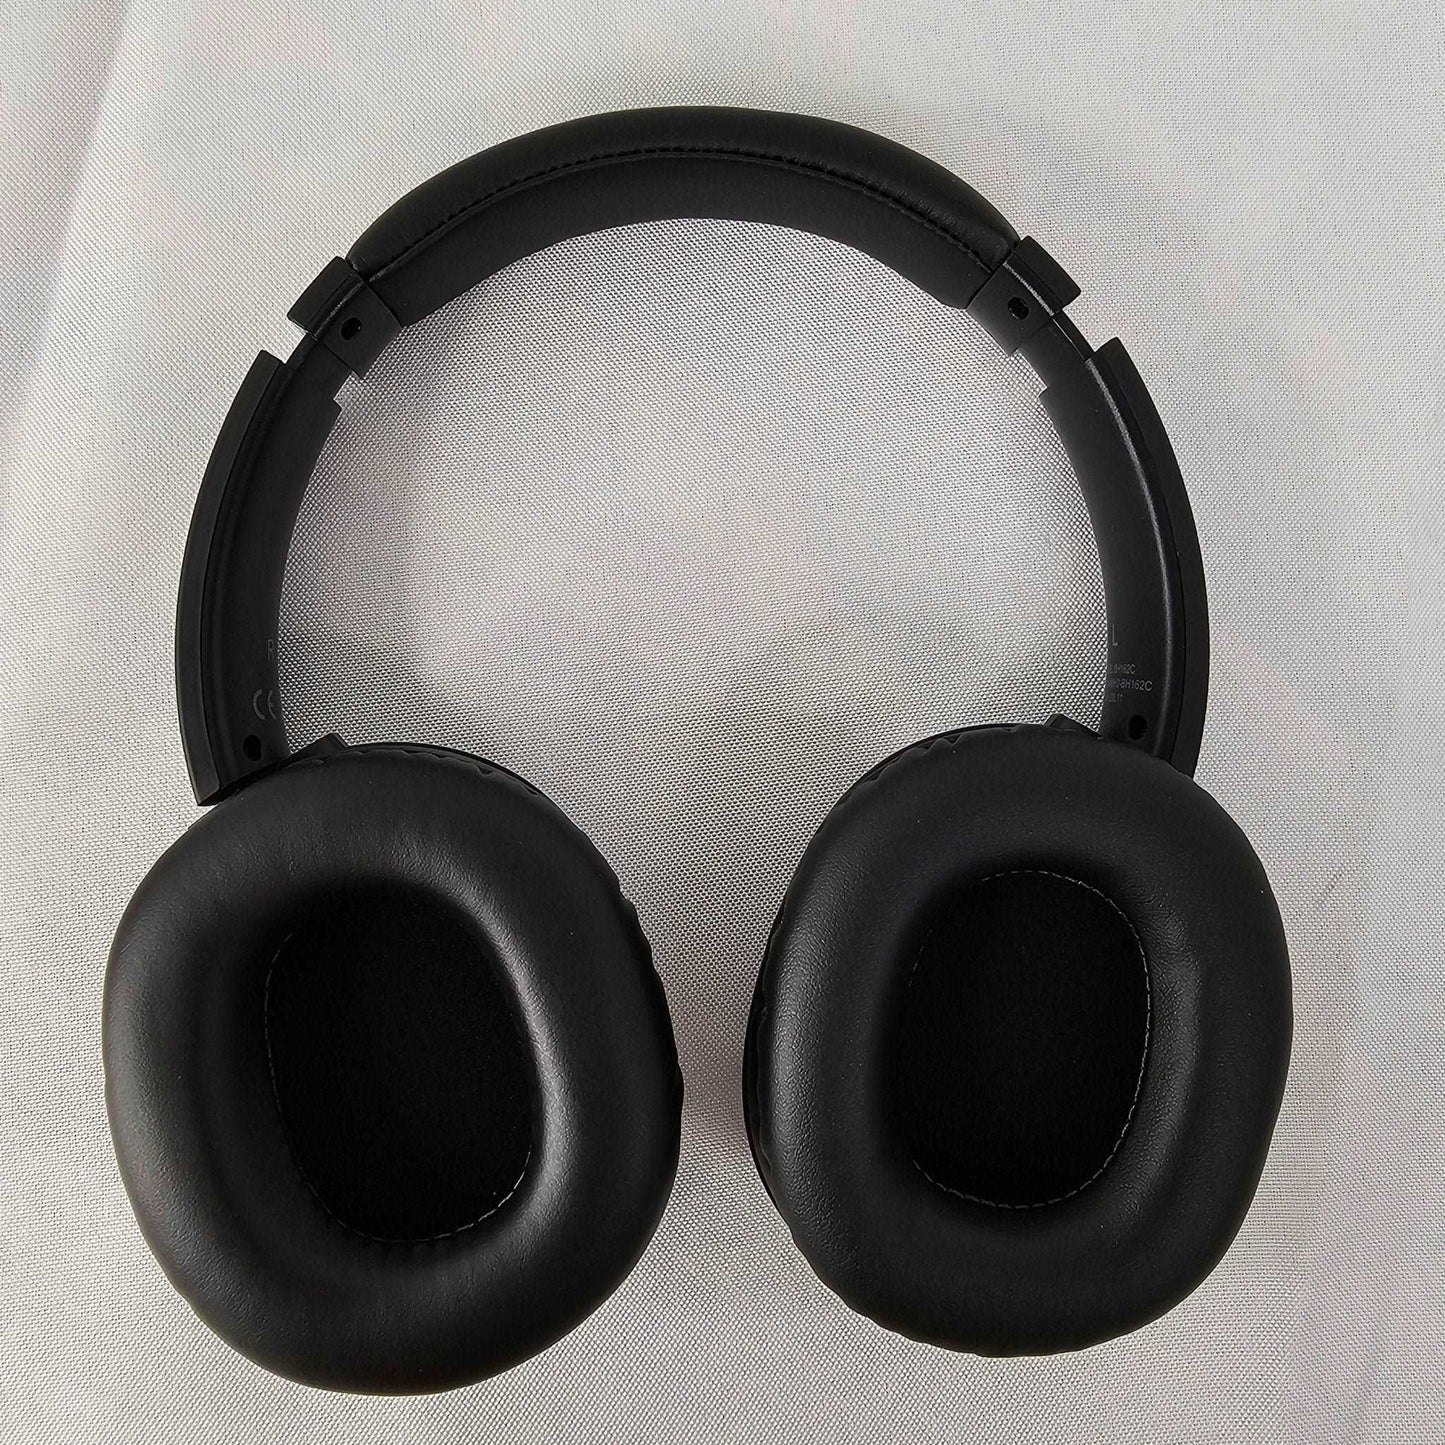 Bluetooth Headphones - Hi-Fi Audio, Hands-Free Calling, Wireless & Wired Modes - DQ Distribution